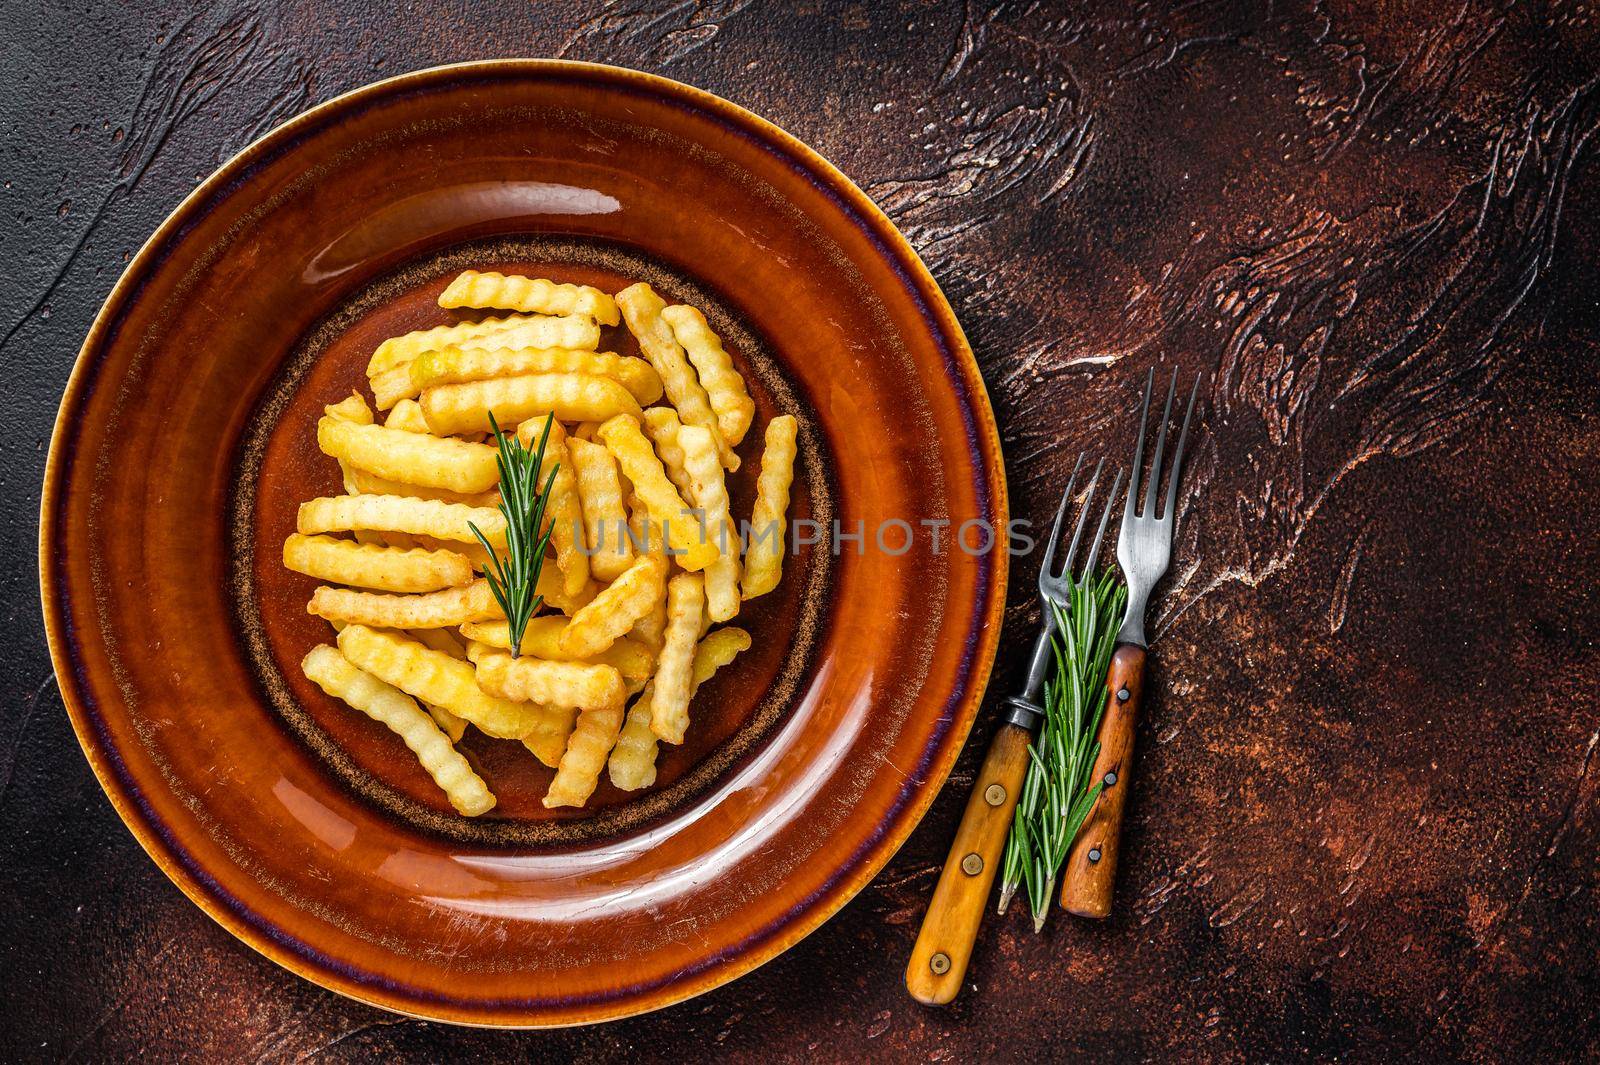 Fried Crinkle French fries potatoes or chips in a rustic plate. Dark background. Top view. Copy space.